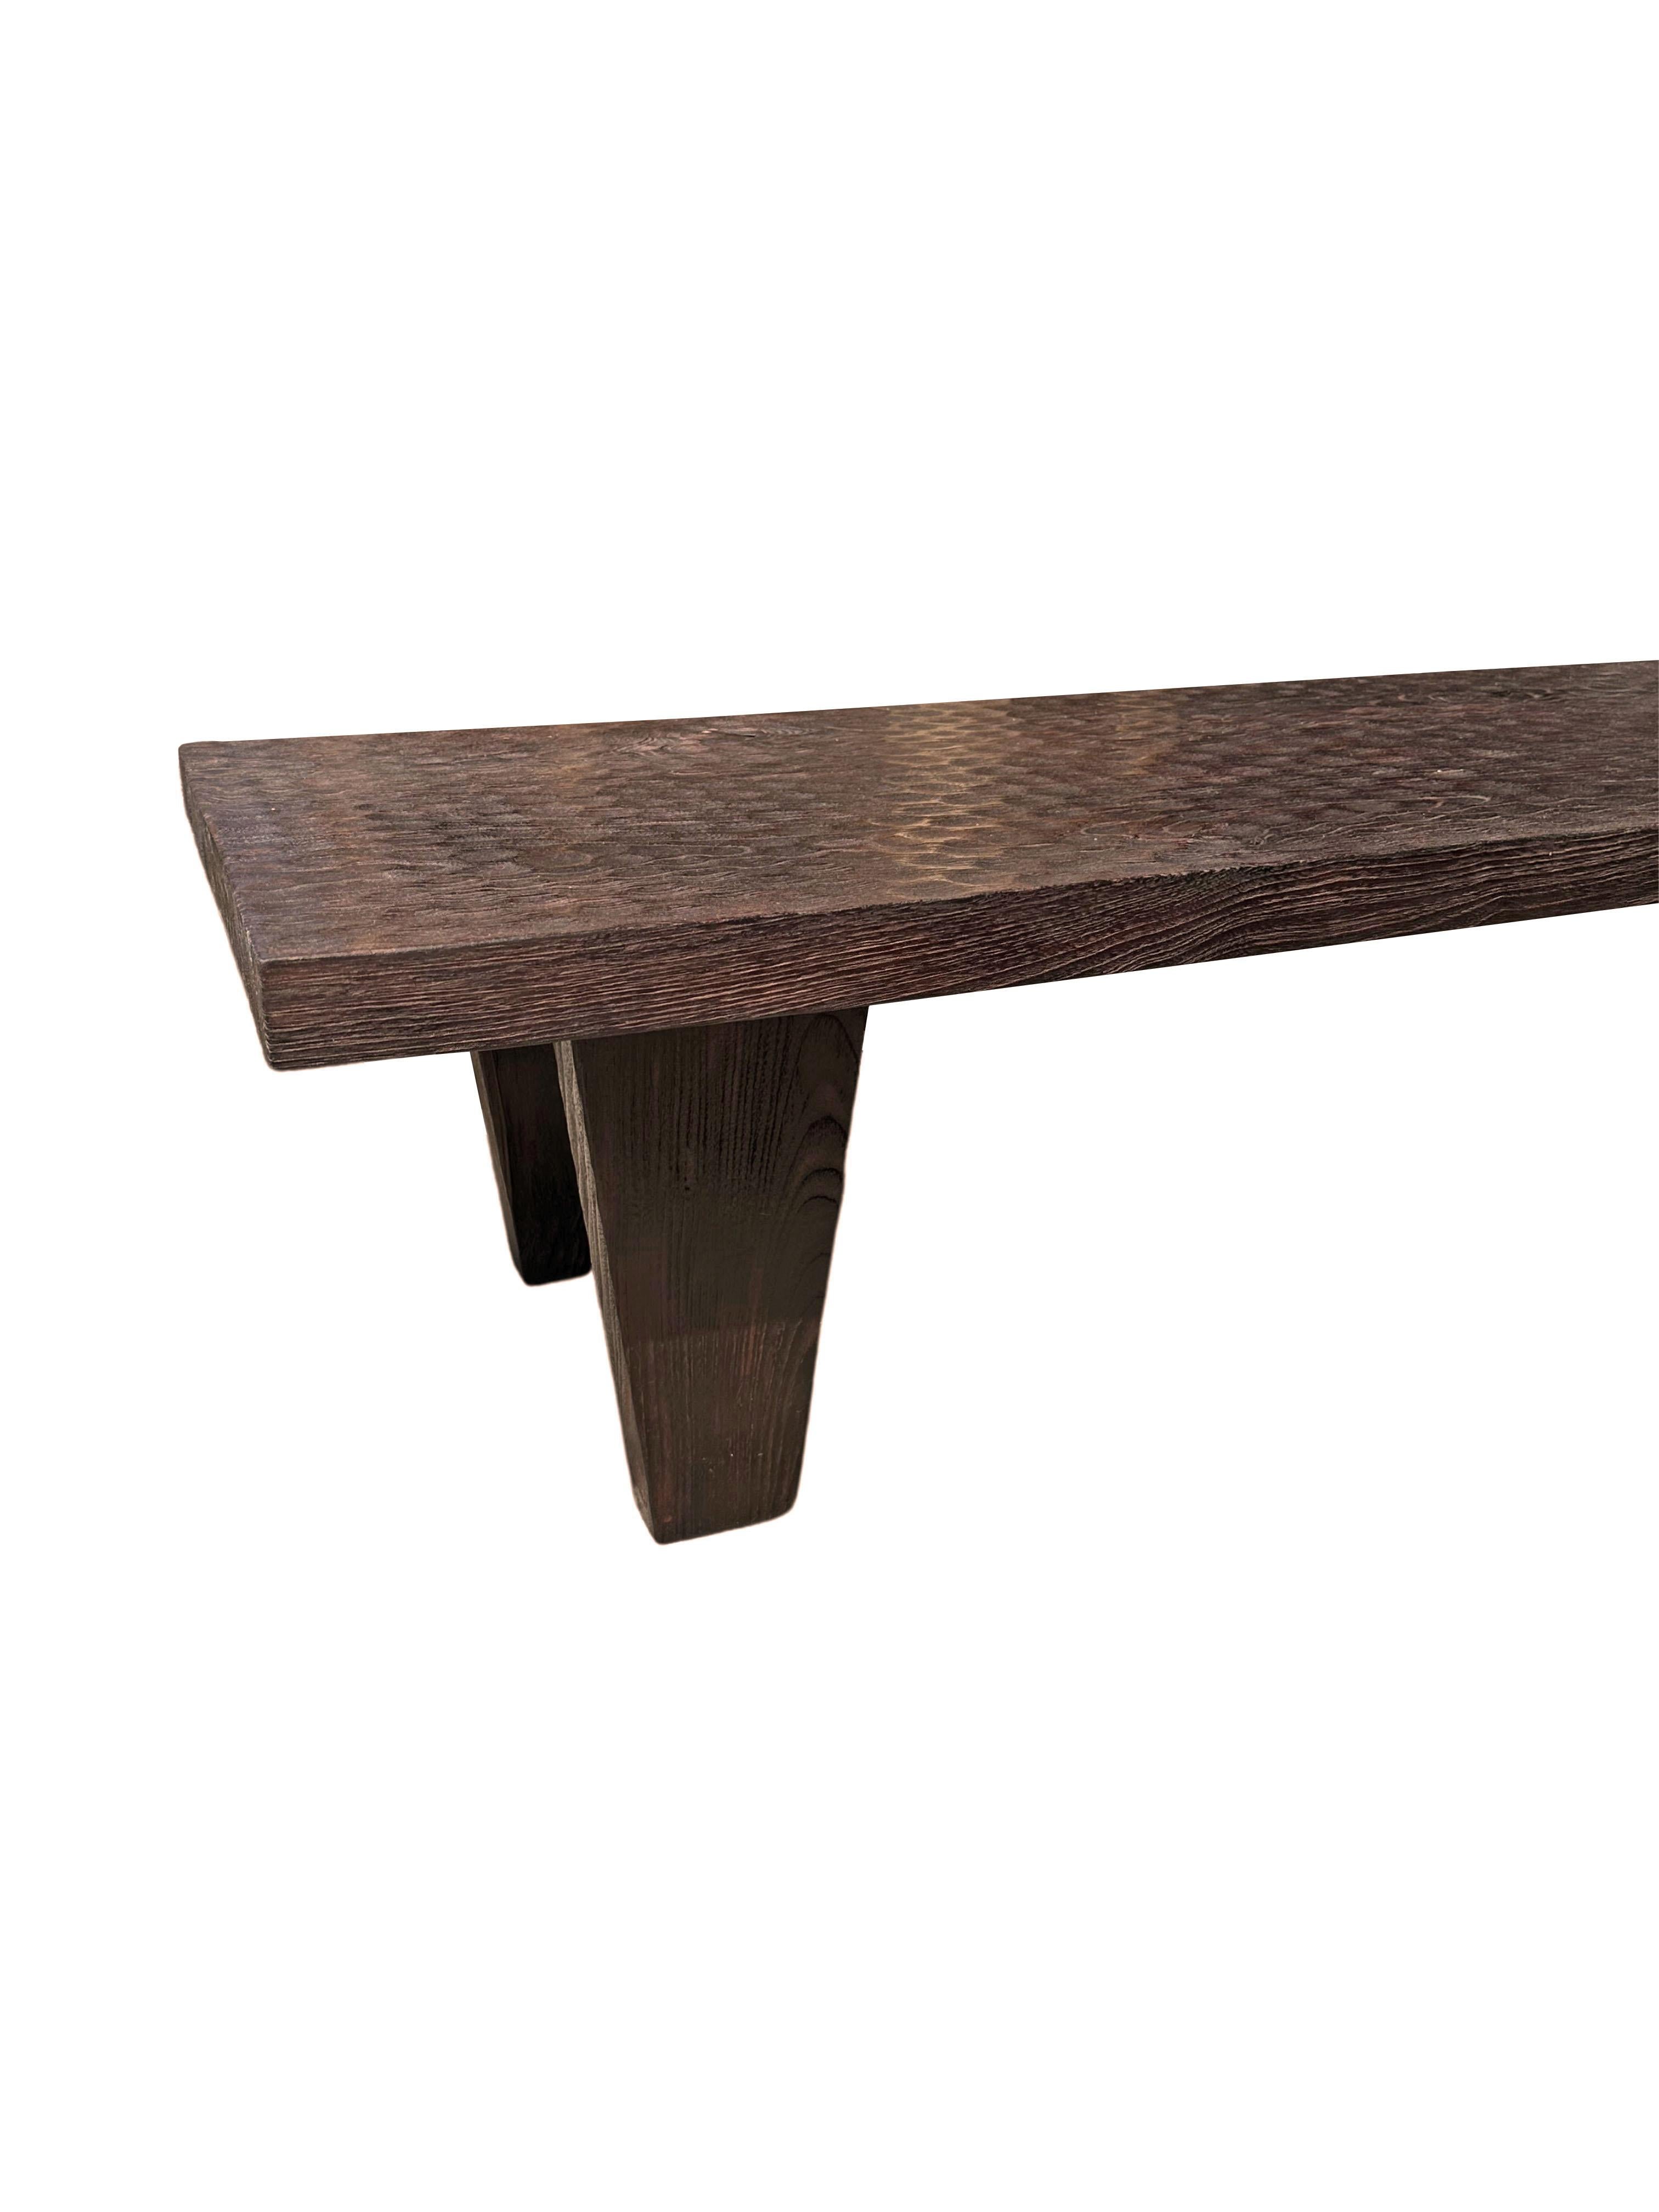 Contemporary Suar Wood Table Hand-Hewn Detailing Espresso Finish, Modern Organic For Sale